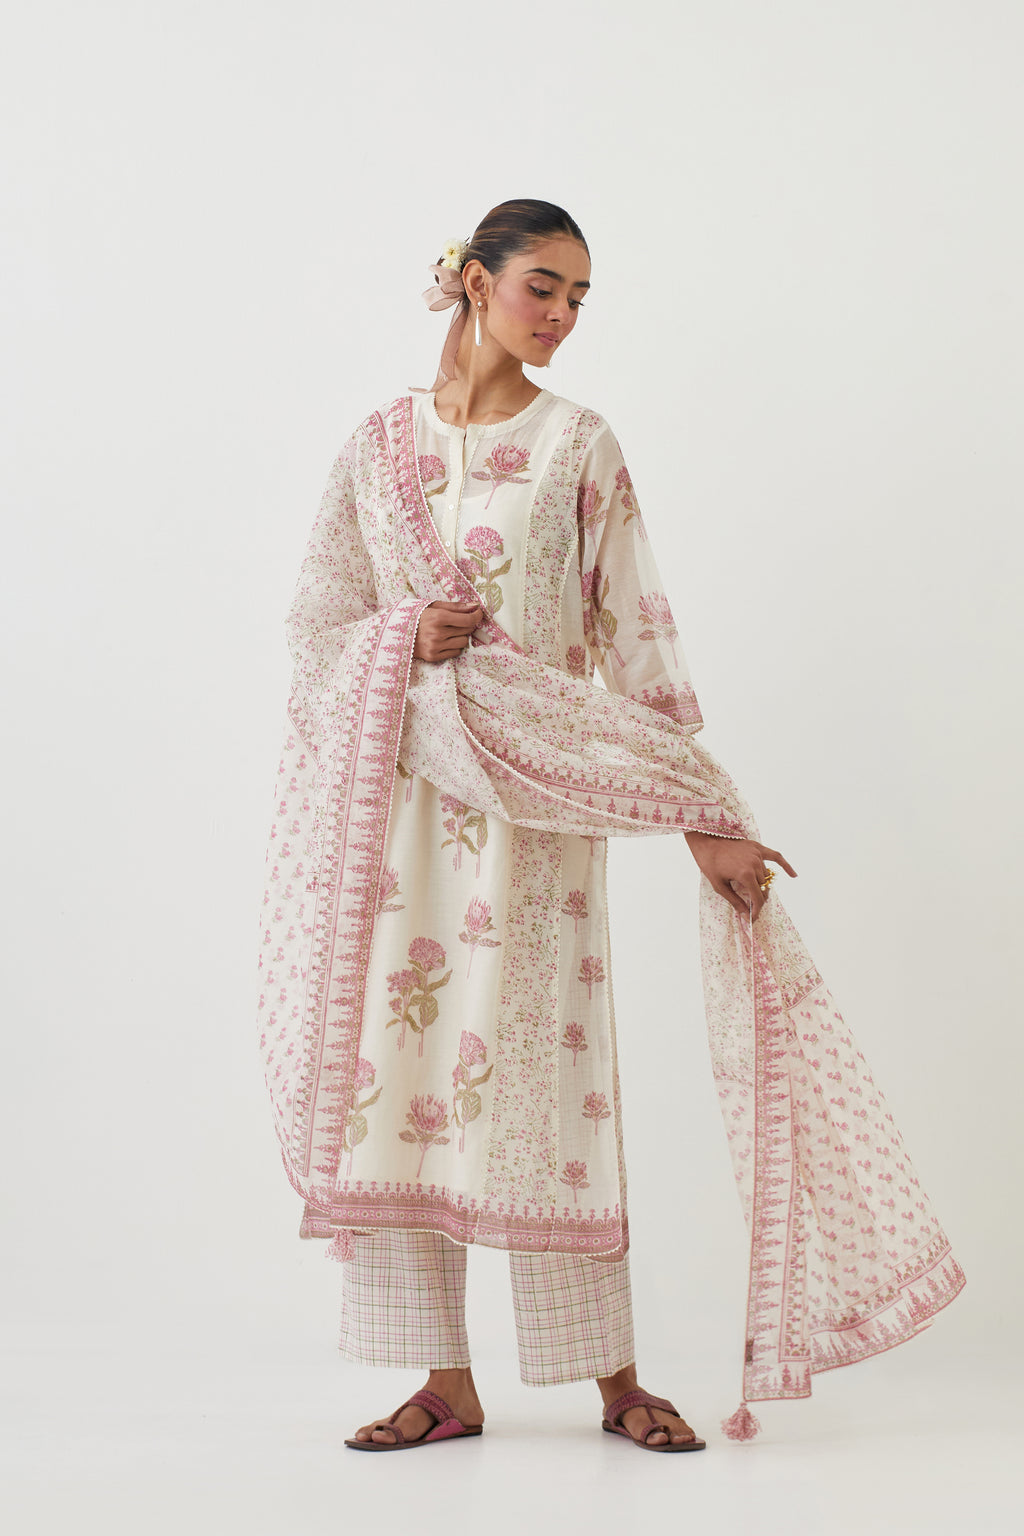 Off white cotton chanderi hand-block printed kurta set with multi-print panels, highlighted with off white ricrac.